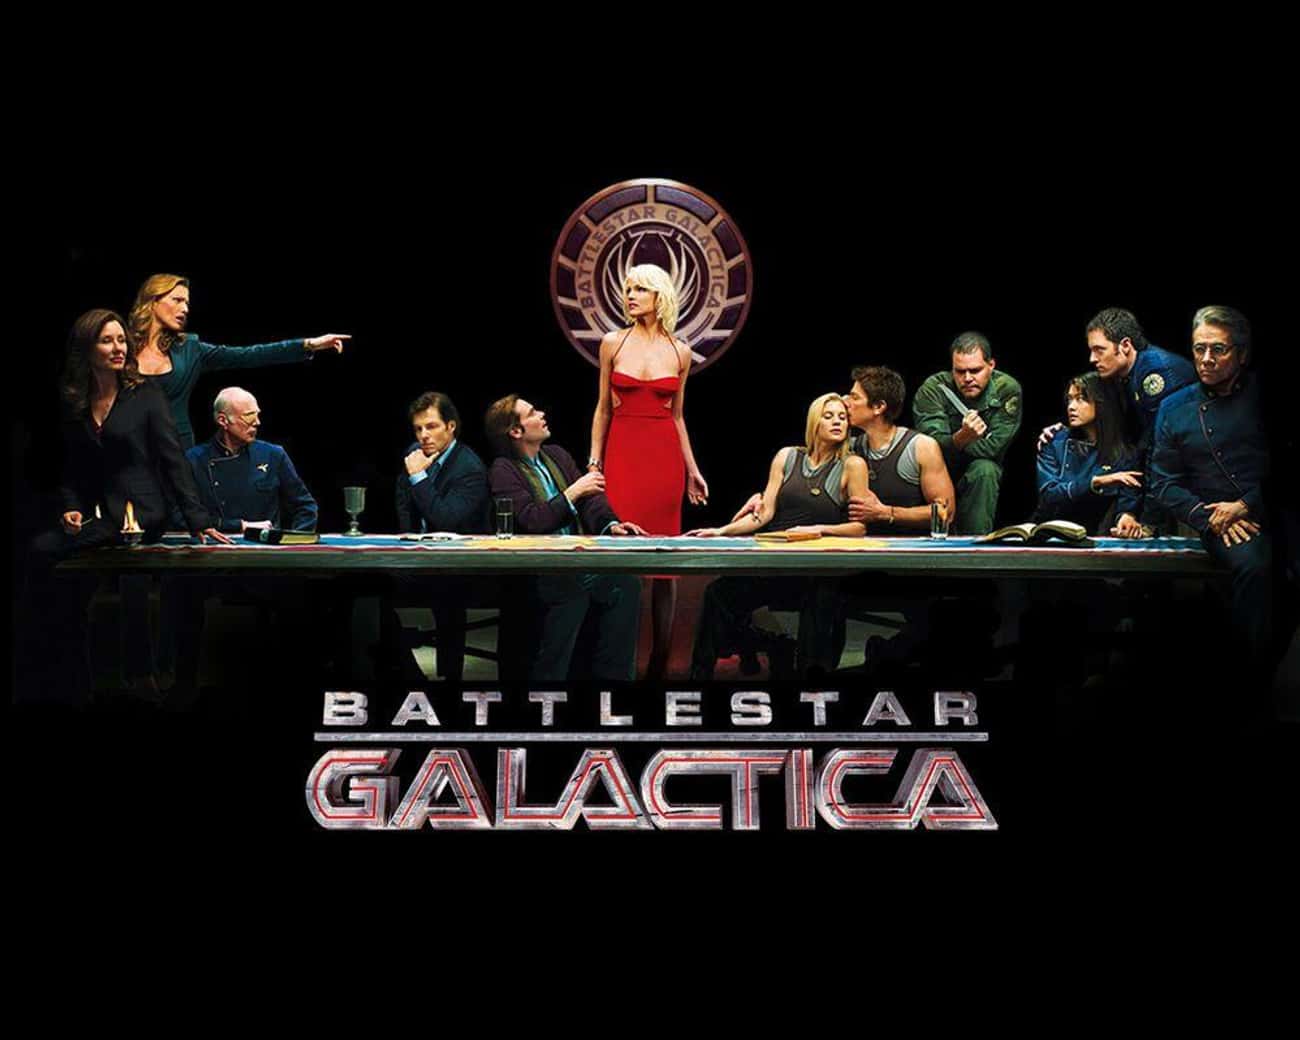 'Battlestar Galactica' Reveals Half The Cast To Be Cylons